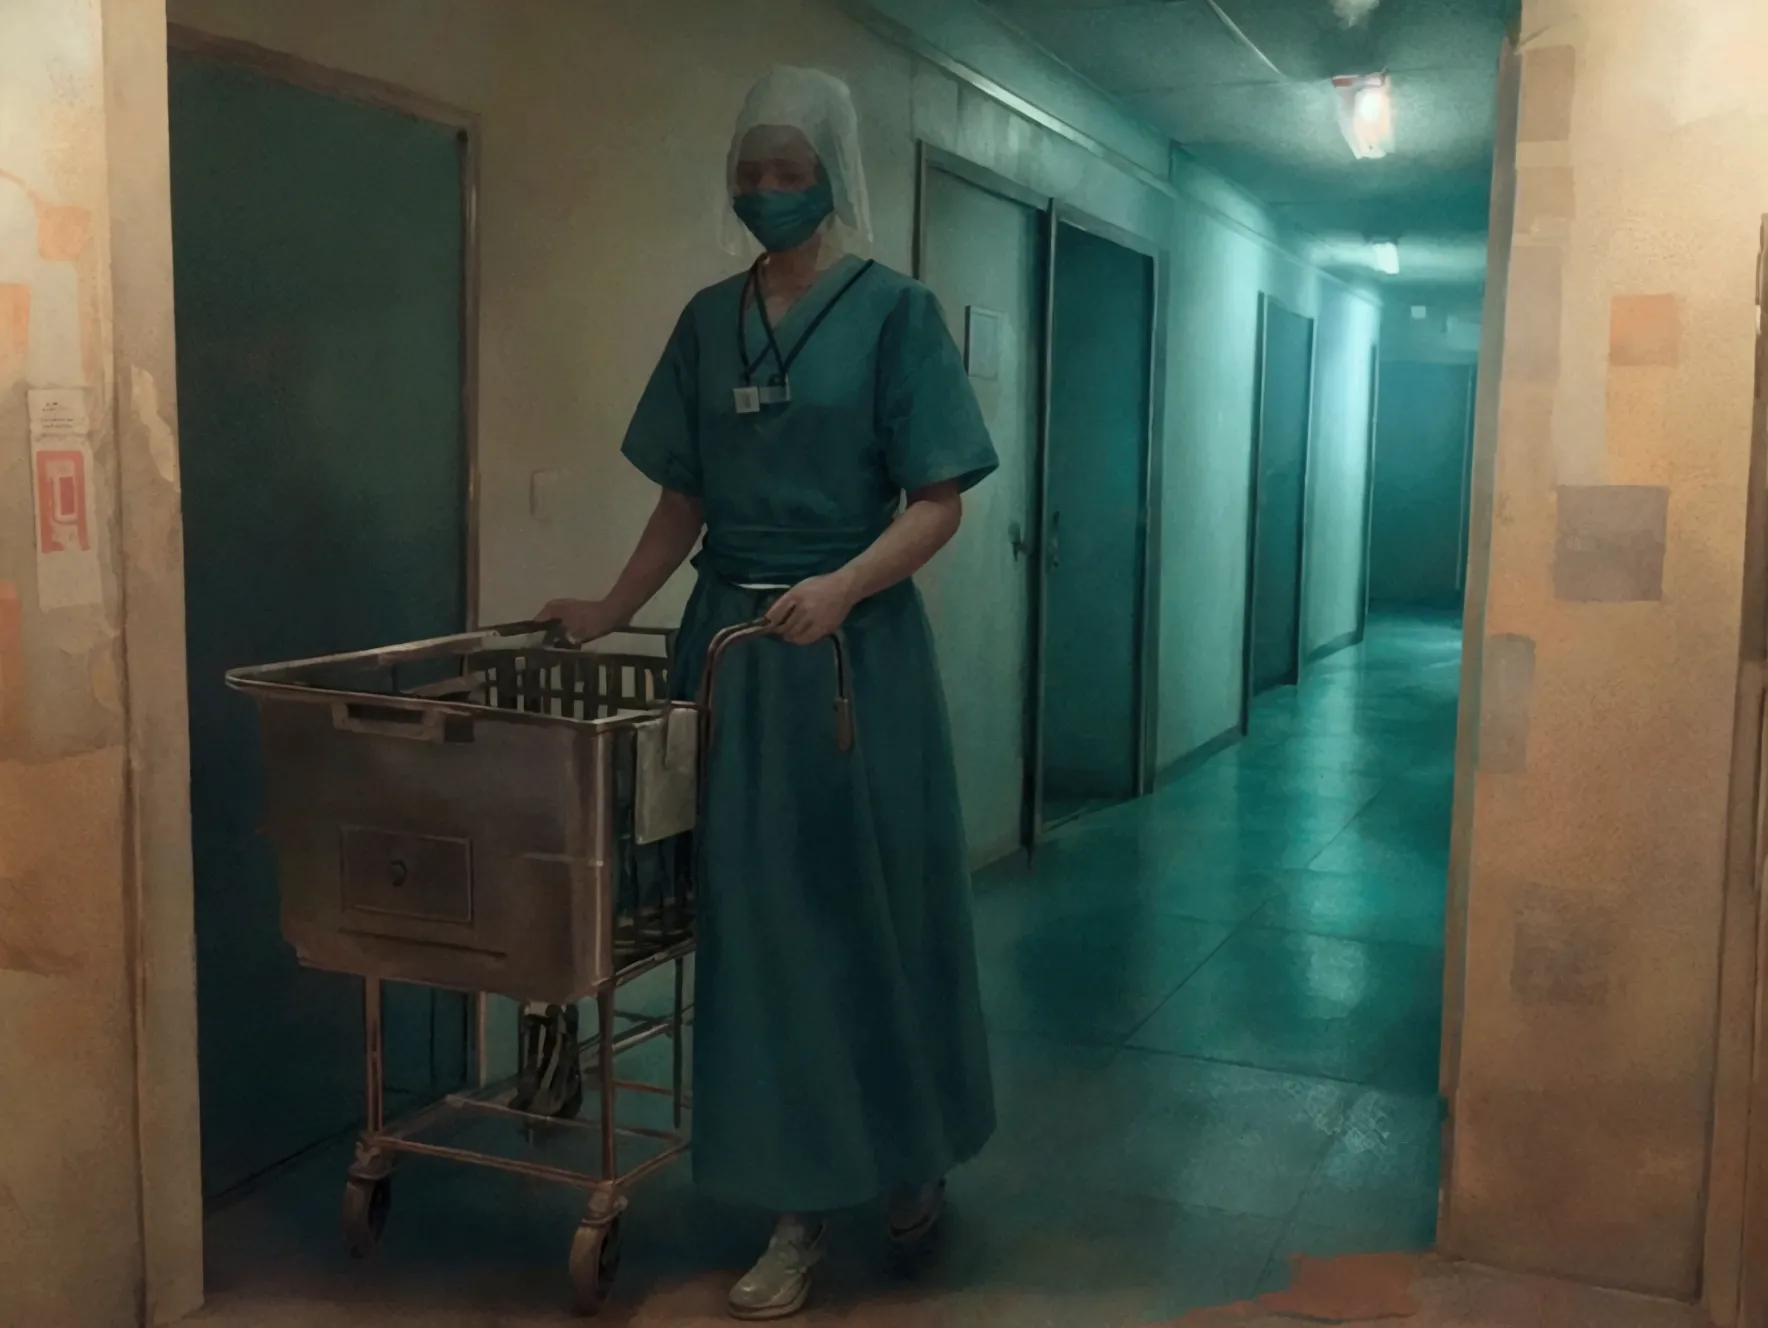 Create an image of a ghost in a hospital corridor, styled like a scene from a horror movie. The ghost should have an eerie, ethe...